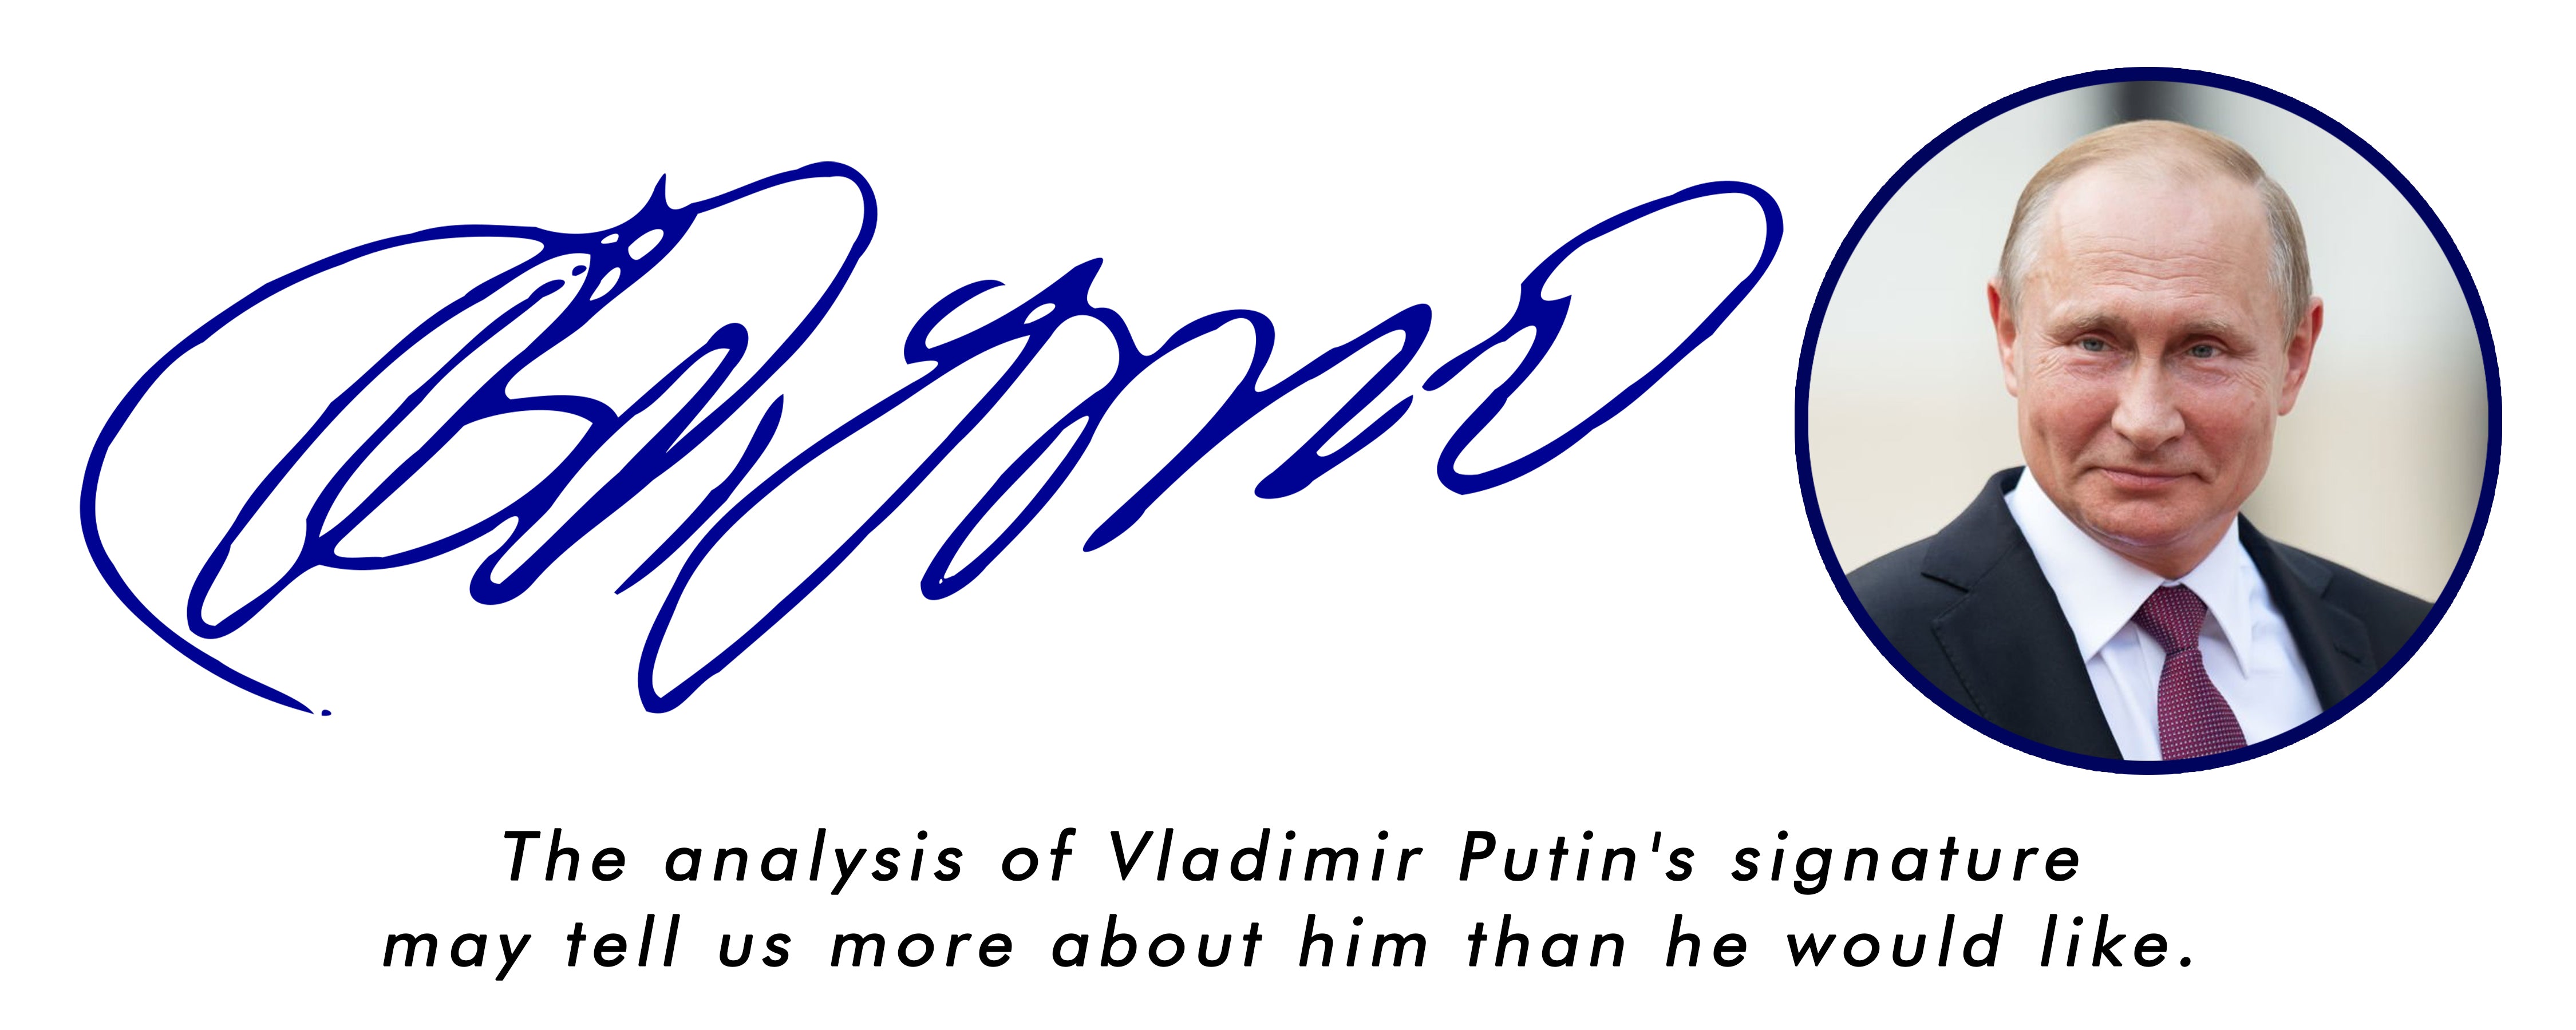 The analysis of Vladimir Putin's signature may tell us more about him than he would like.